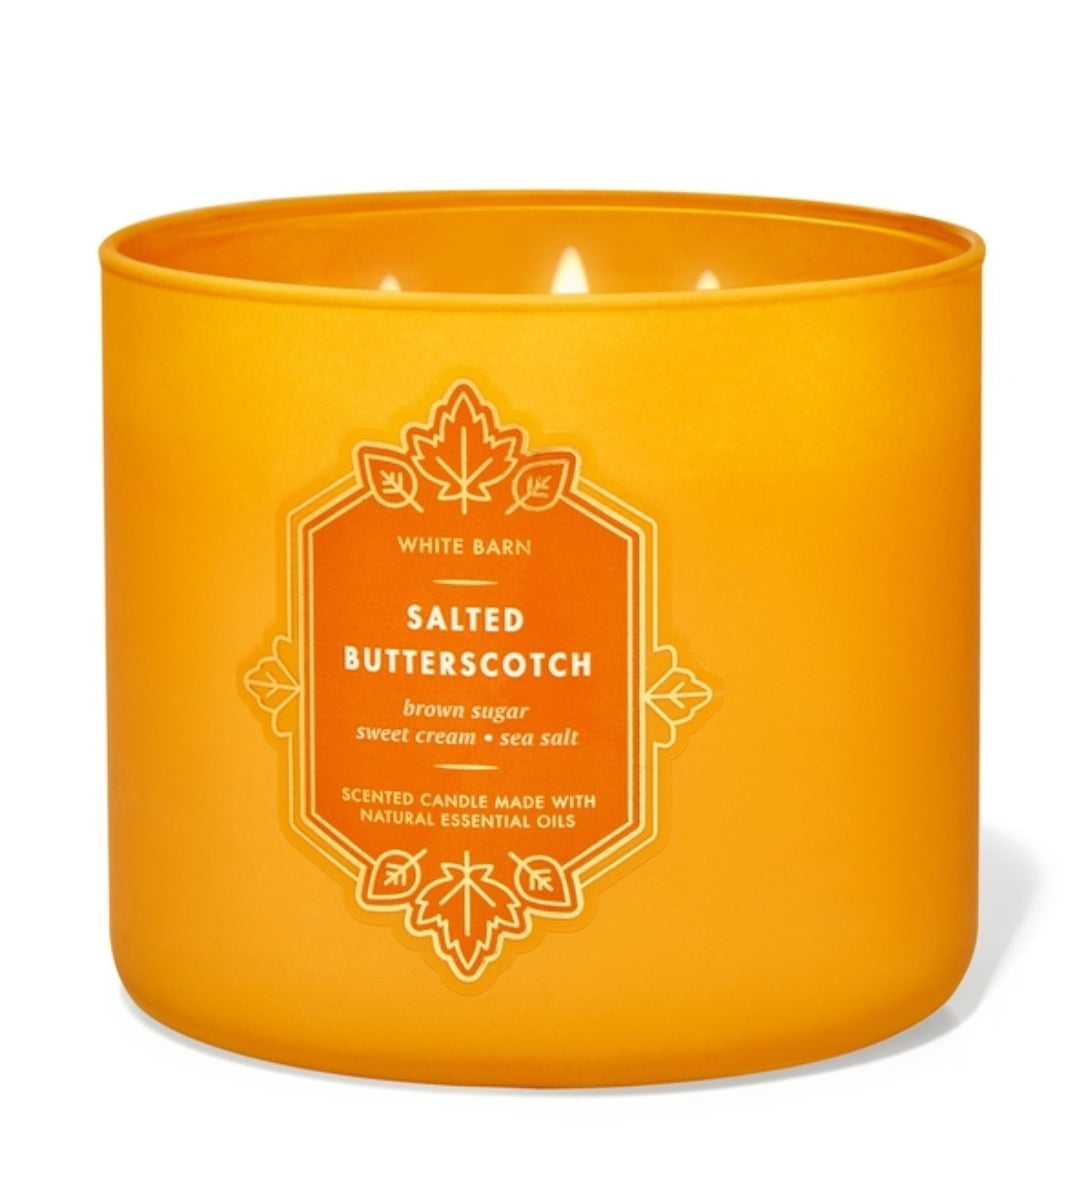 Salted Butterscotch Scented Candle